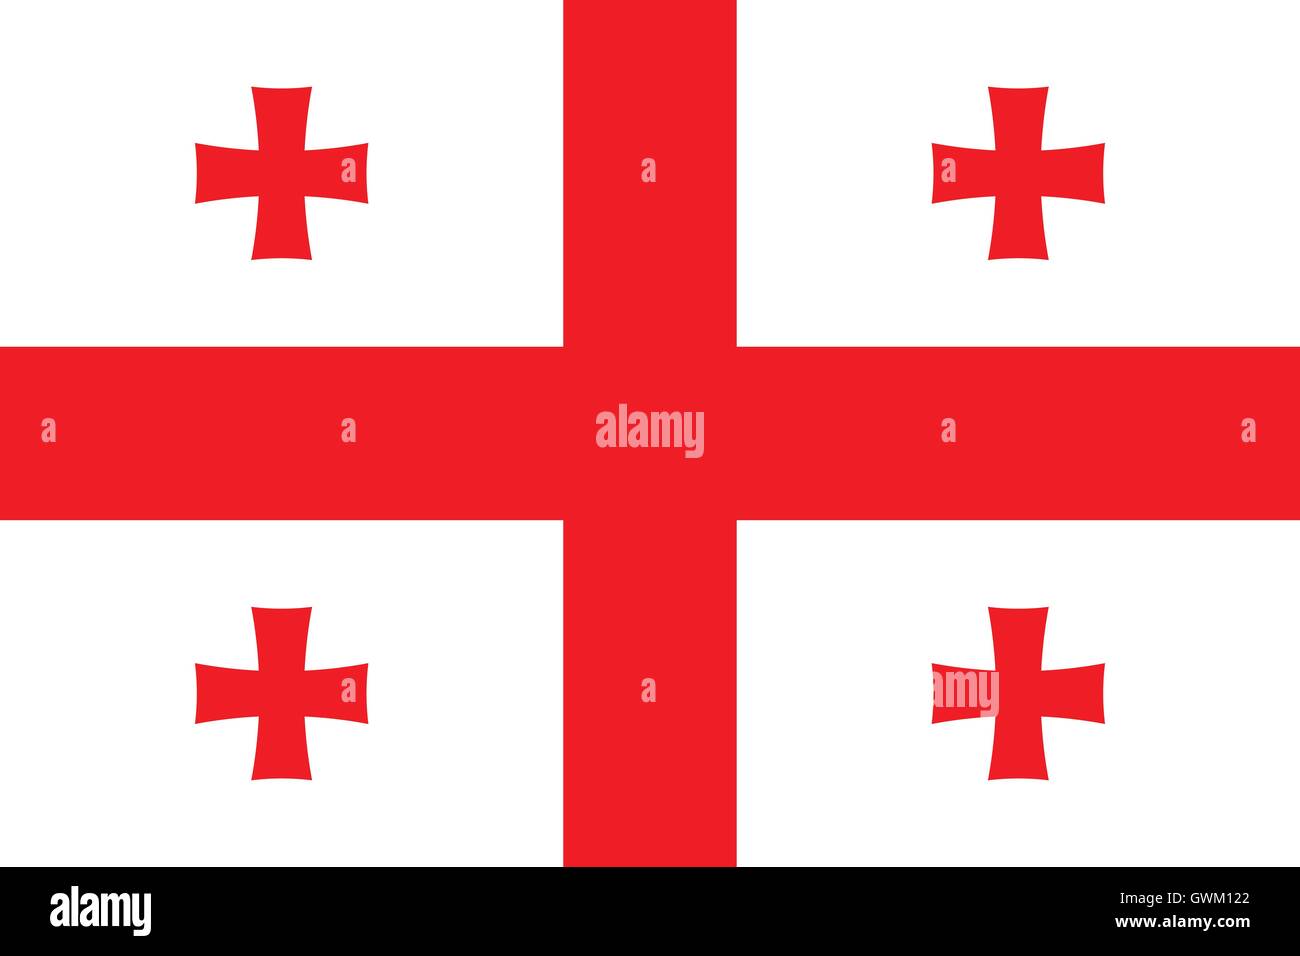 Georgia flag, Five Cross Flag, official colors and proportion, accurate vector illustration. Stock Vector